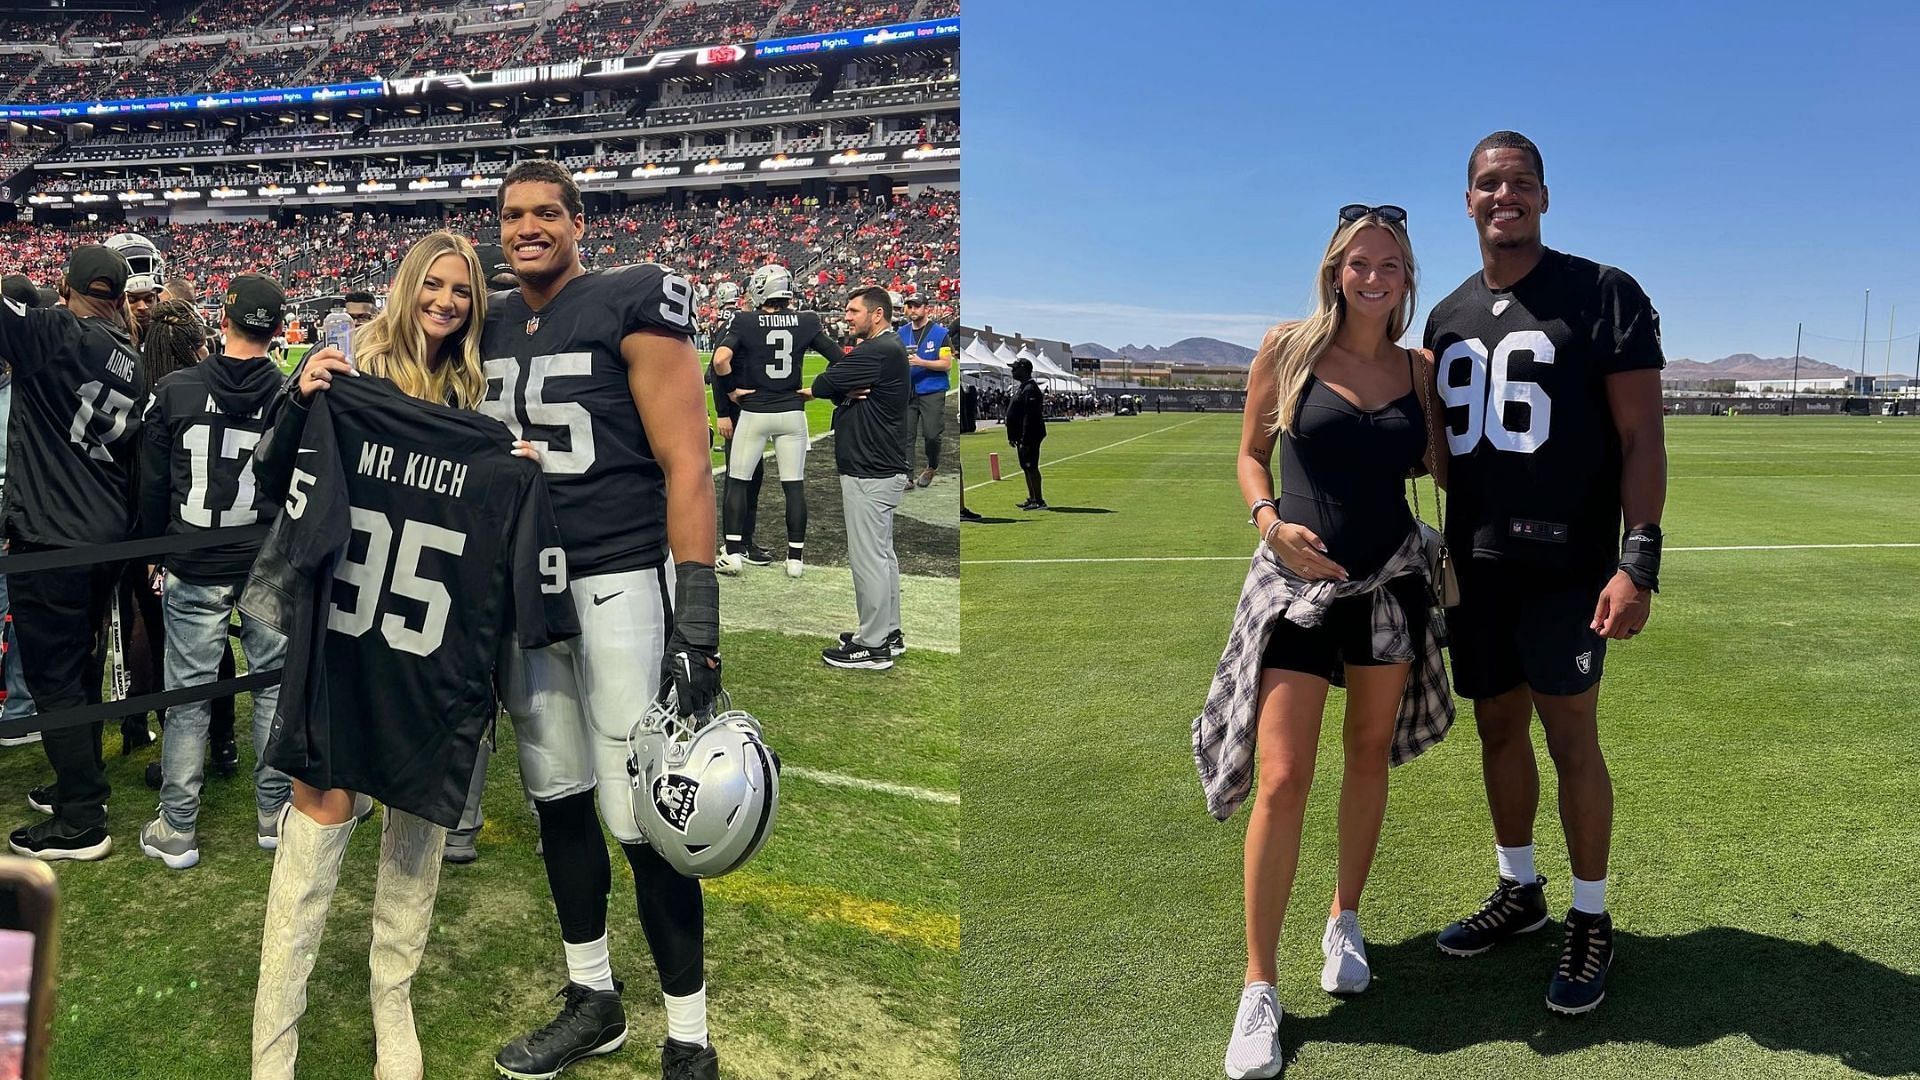 Allison Kuch reveals her thoughts about the release of her husband from the Raiders.